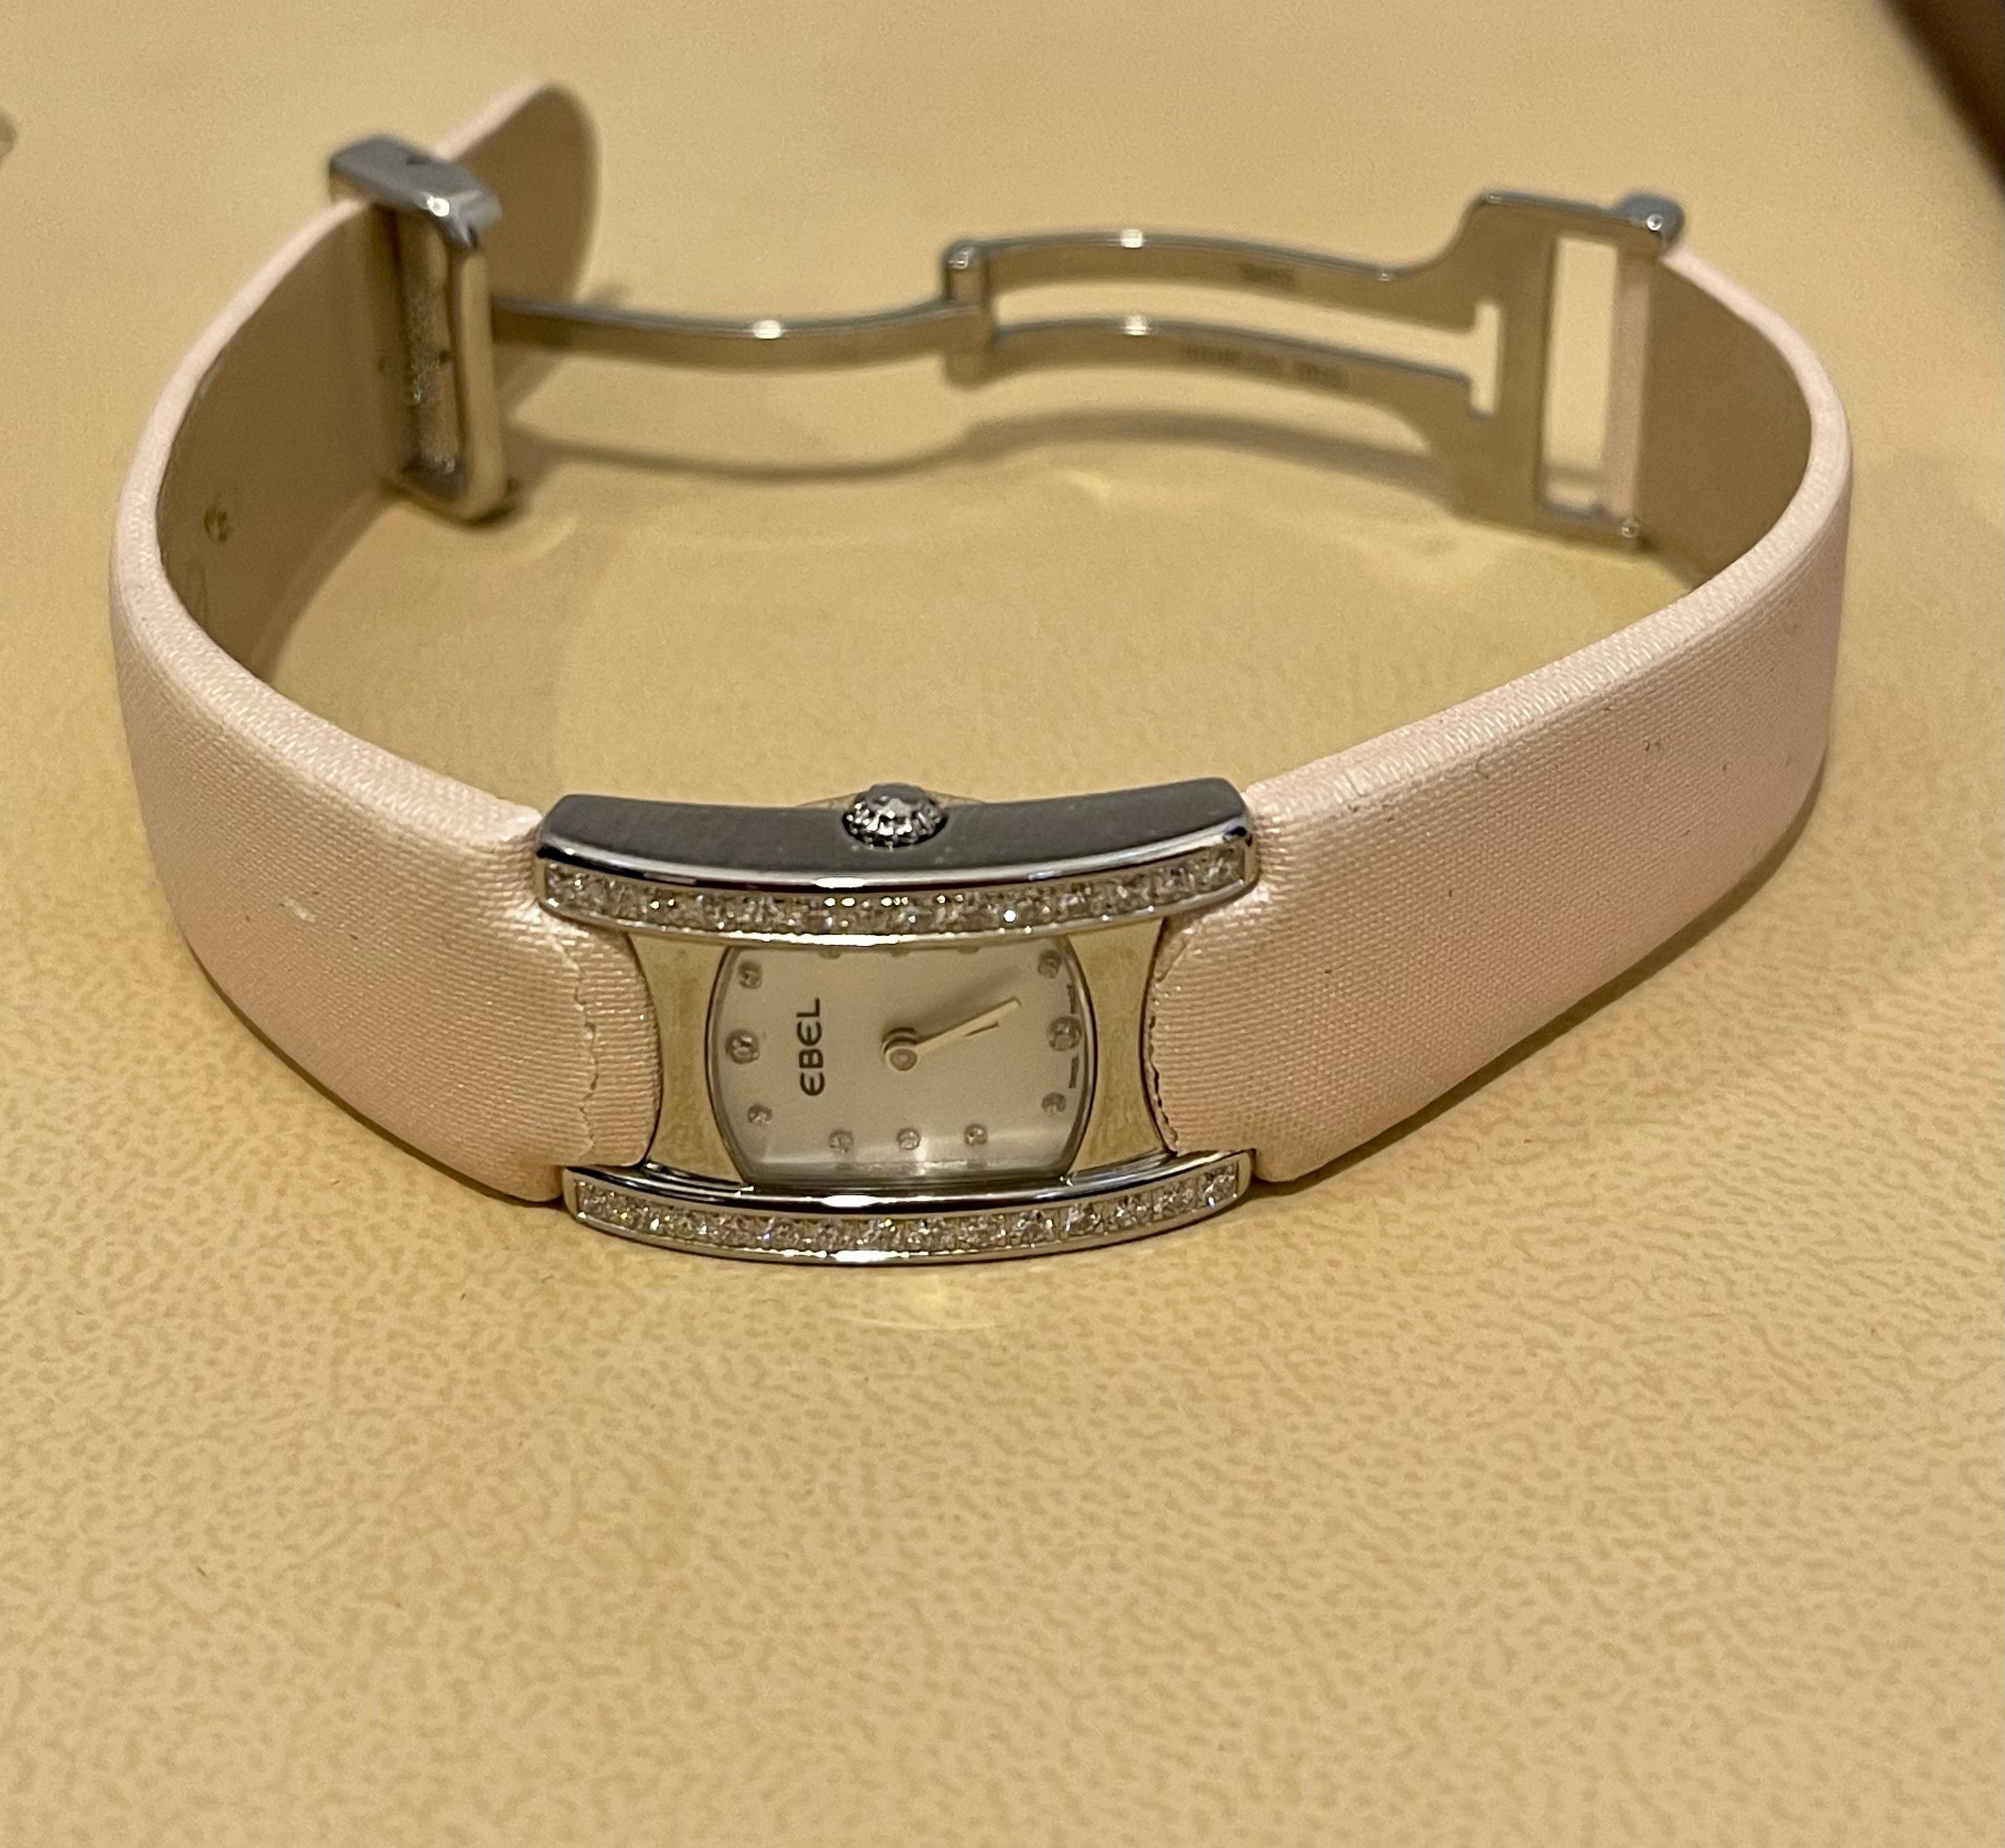 Ladies Ebel Beluga Stainless Steel with Diamonds E9057a28-10, Leather Pink Belt In Excellent Condition For Sale In New York, NY